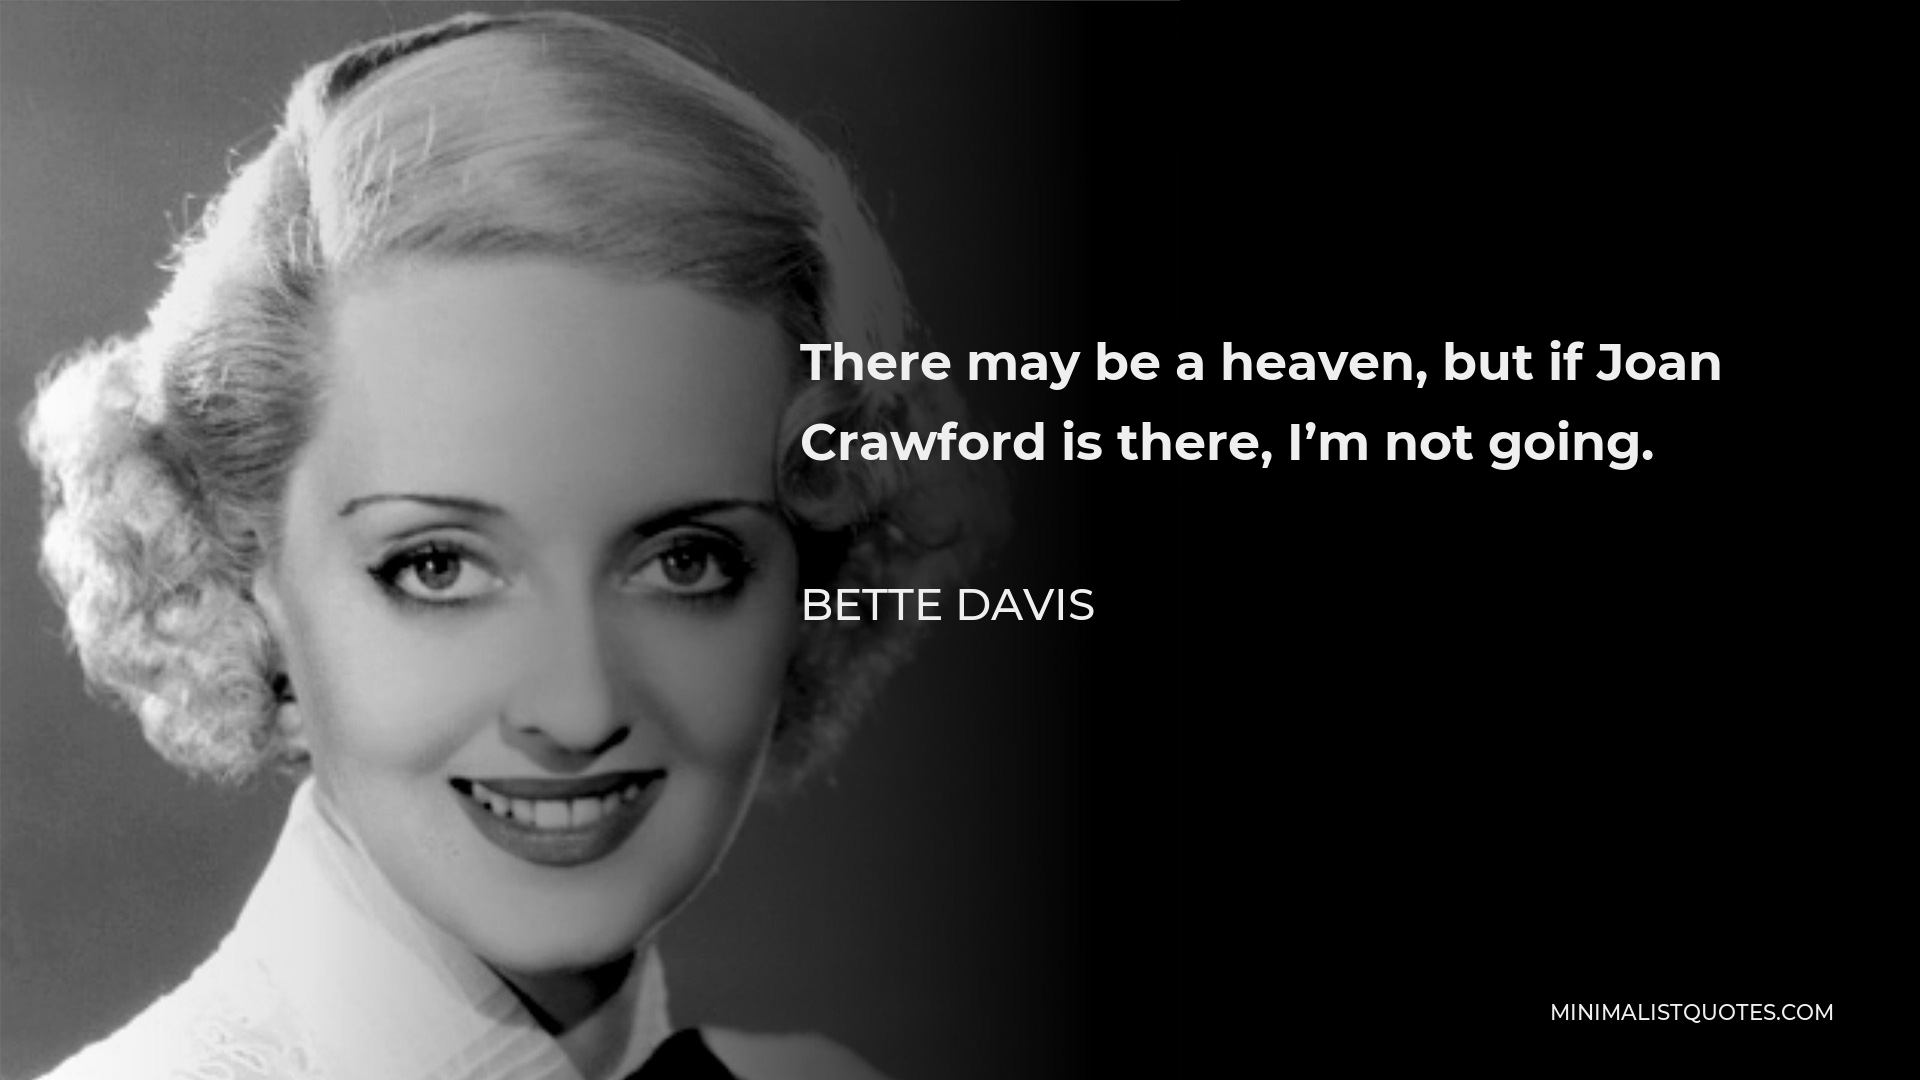 Bette Davis Quote - There may be a heaven, but if Joan Crawford is there, I’m not going.